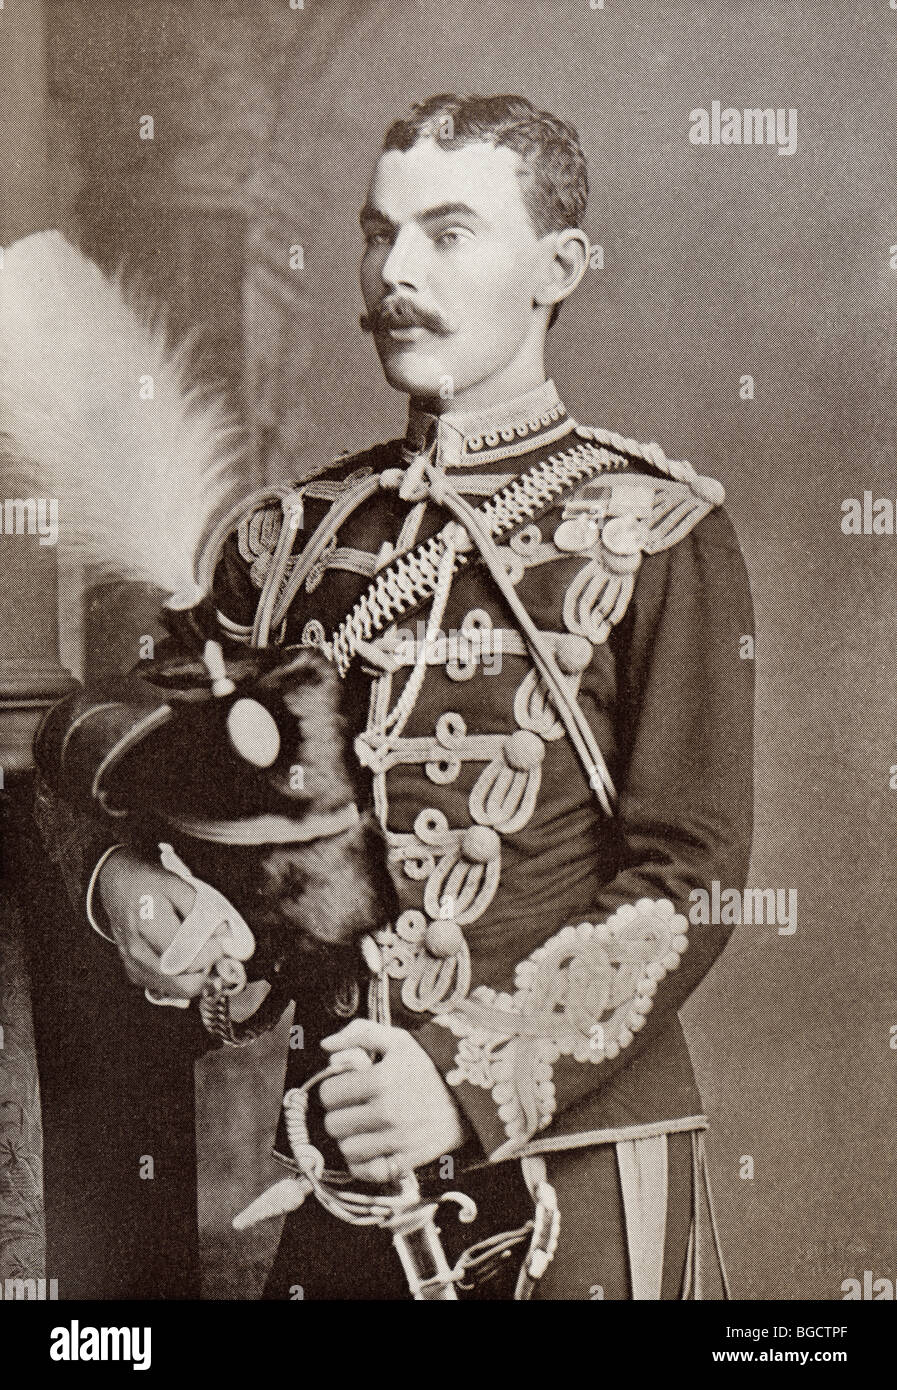 Lieutenant Colonel David Stanley William Ogilvy, 11th Earl of Airlie, 1856 to 1900. Scottish peer. Stock Photo